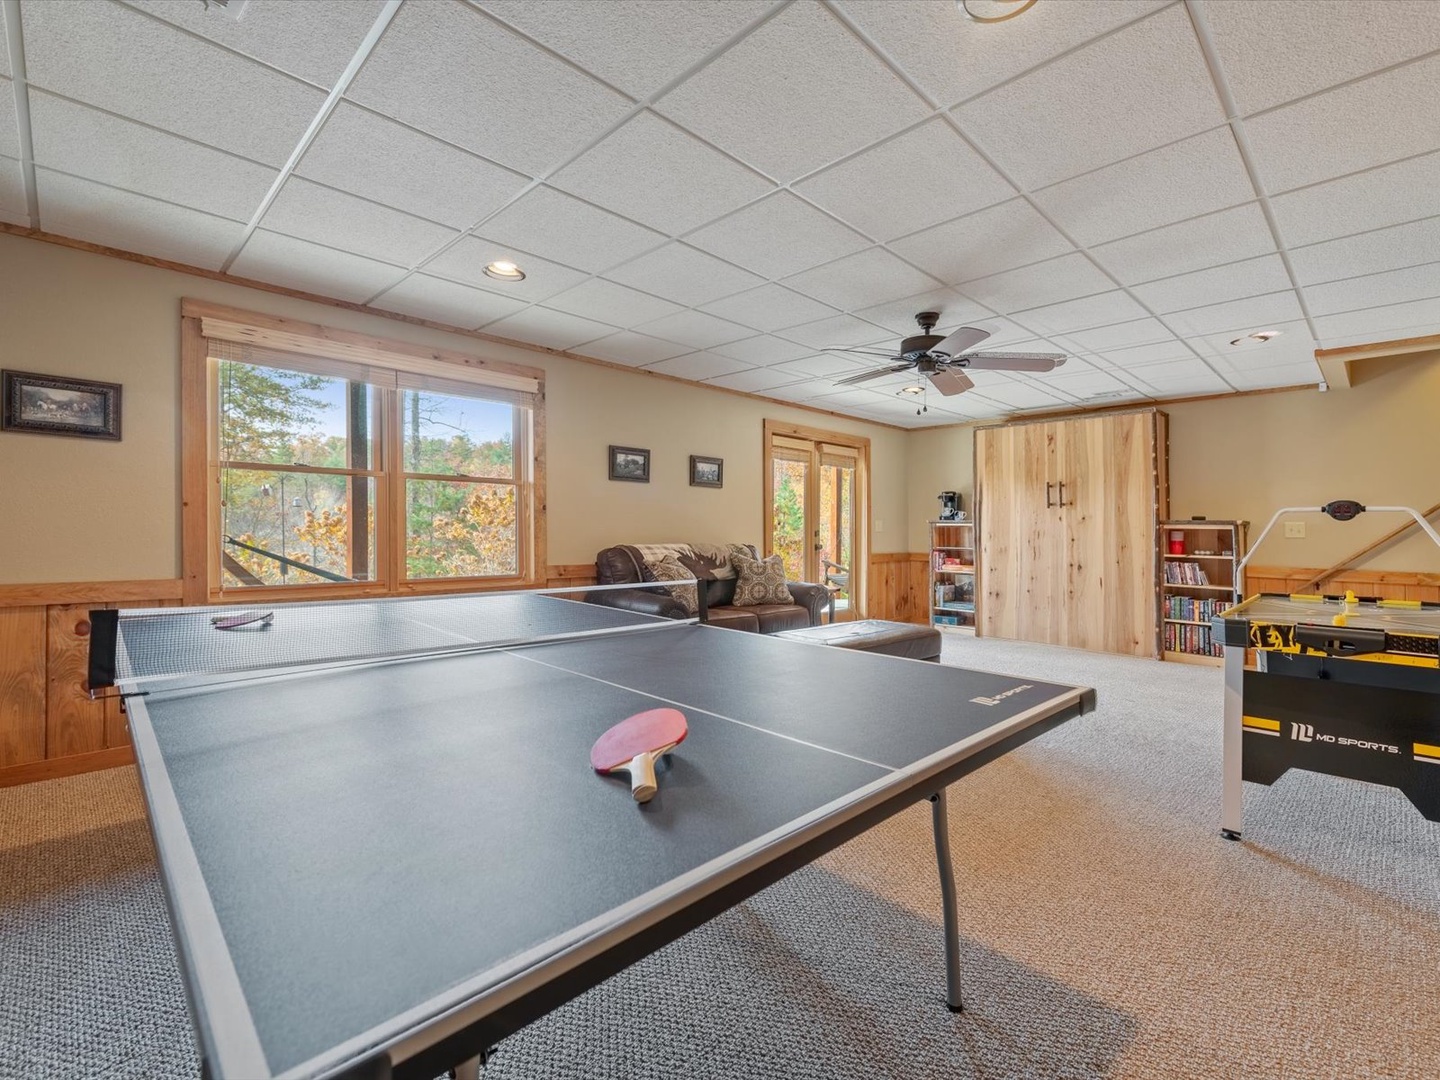 Whispering Pond Lodge -  Lower Level Ping Pong Table